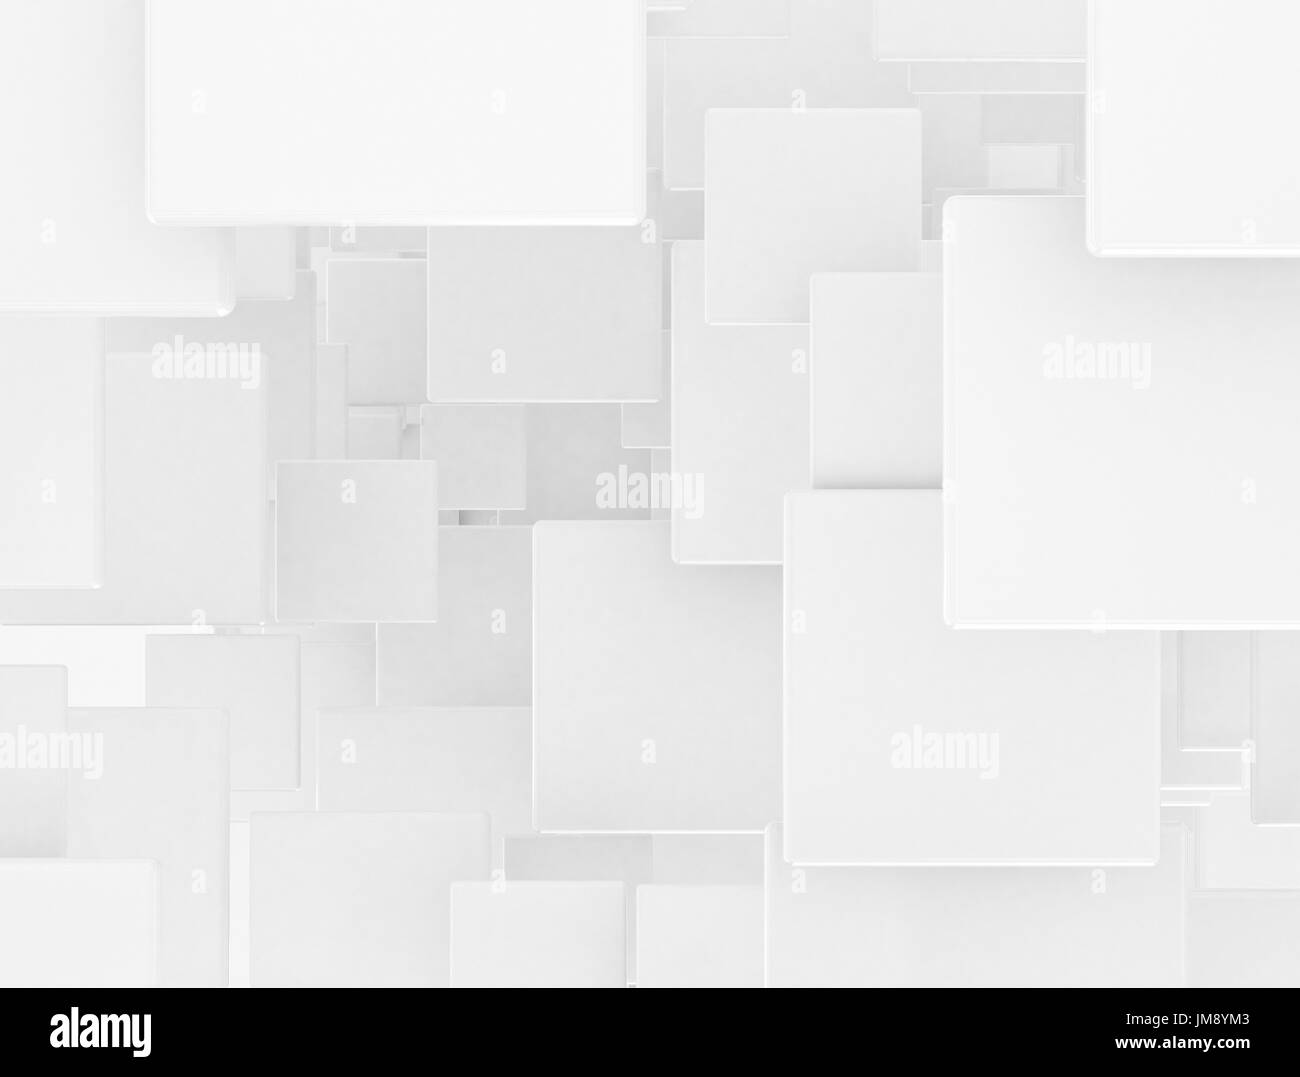 Overlapping white squares design template Stock Photo